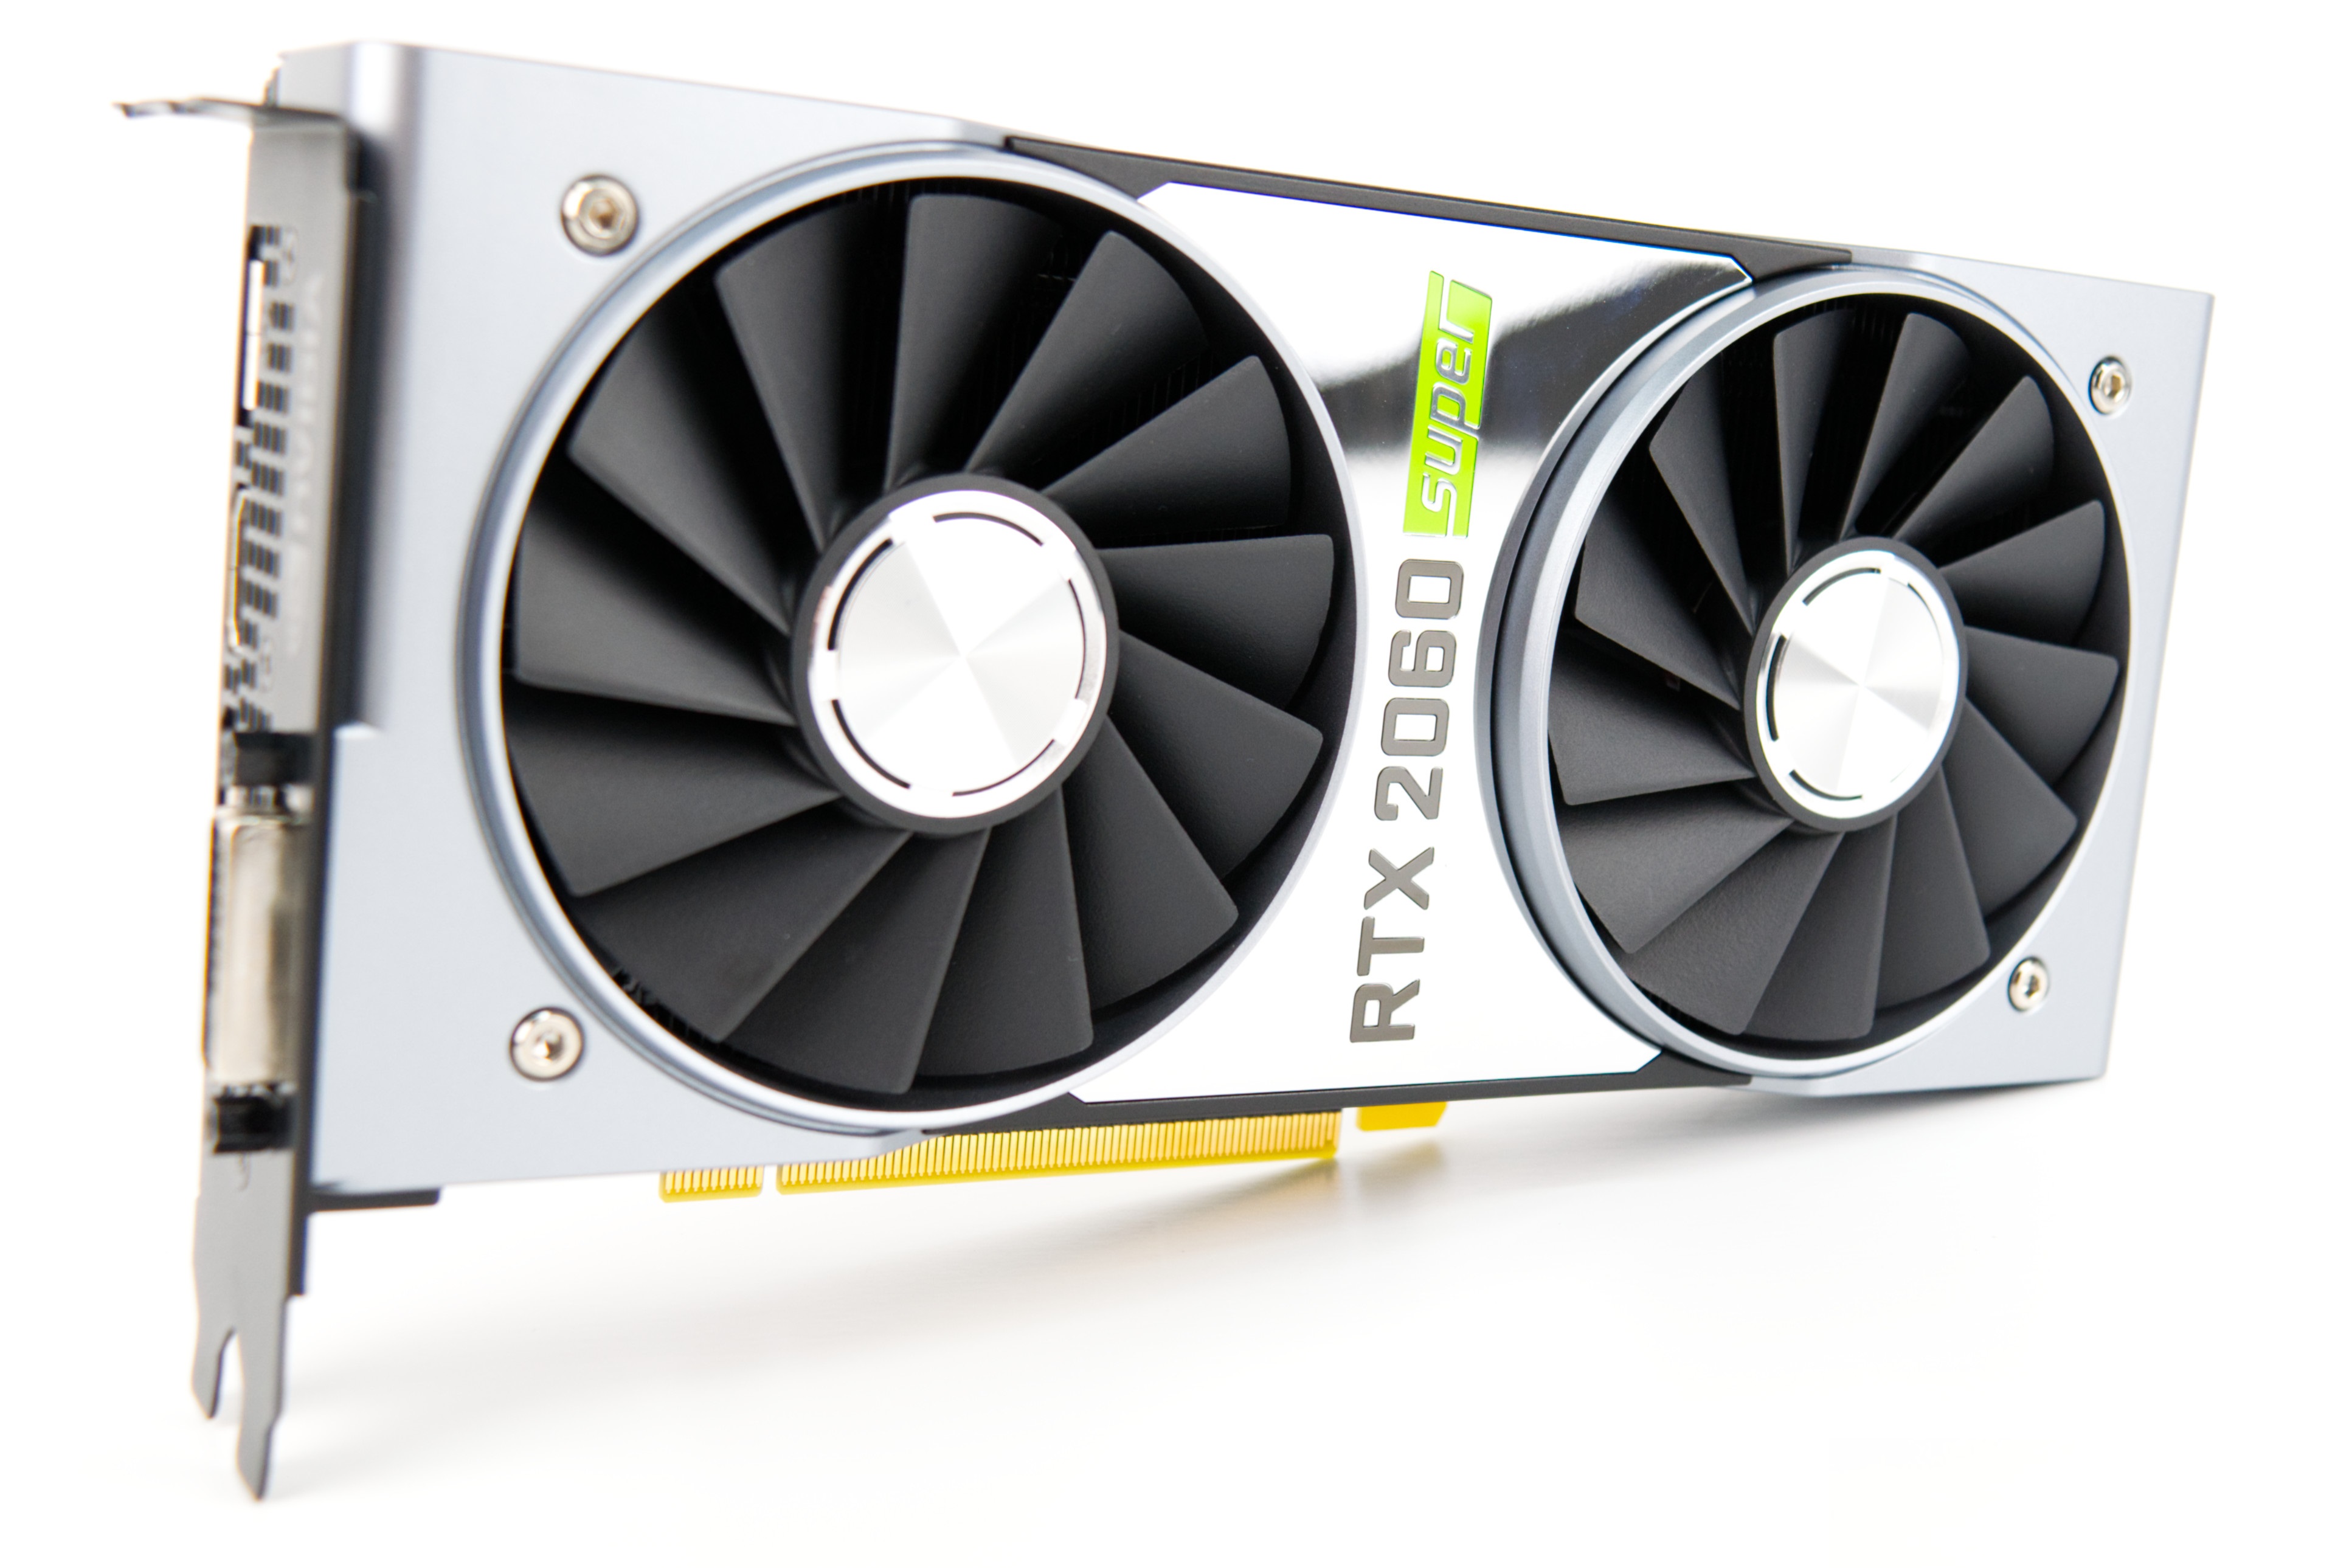 Barcelona dagsorden tæerne Nvidia GeForce RTX 2060 Super Review: The entry-level GPU finally comes  with 8 GB of VRAM - NotebookCheck.net Reviews